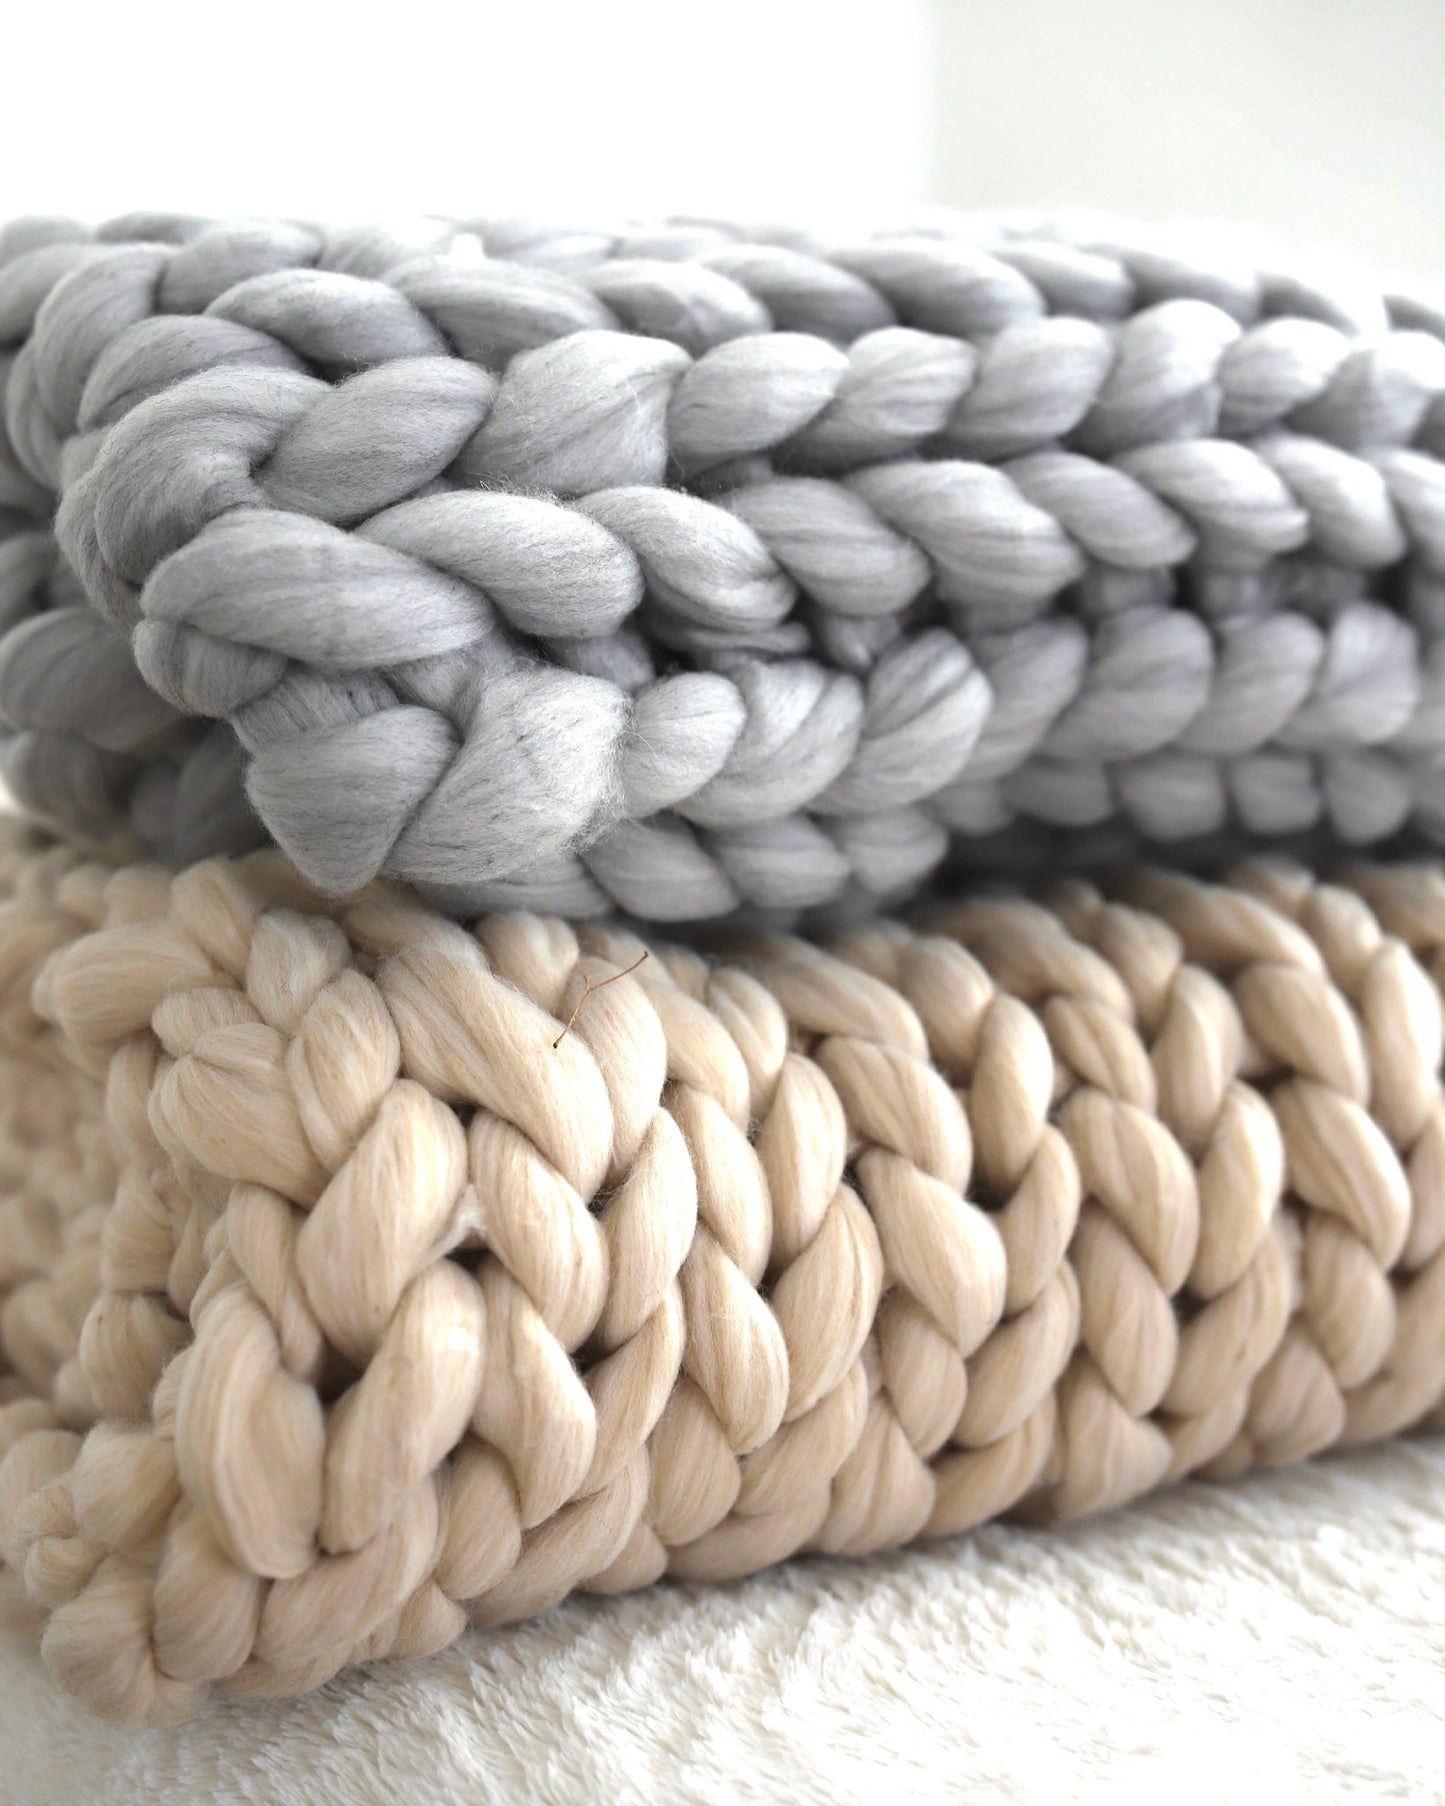 PREMIUM HAND-CRAFTED COLOSSAL CHUNKY KNIT THROW (50"x70") (Inches)